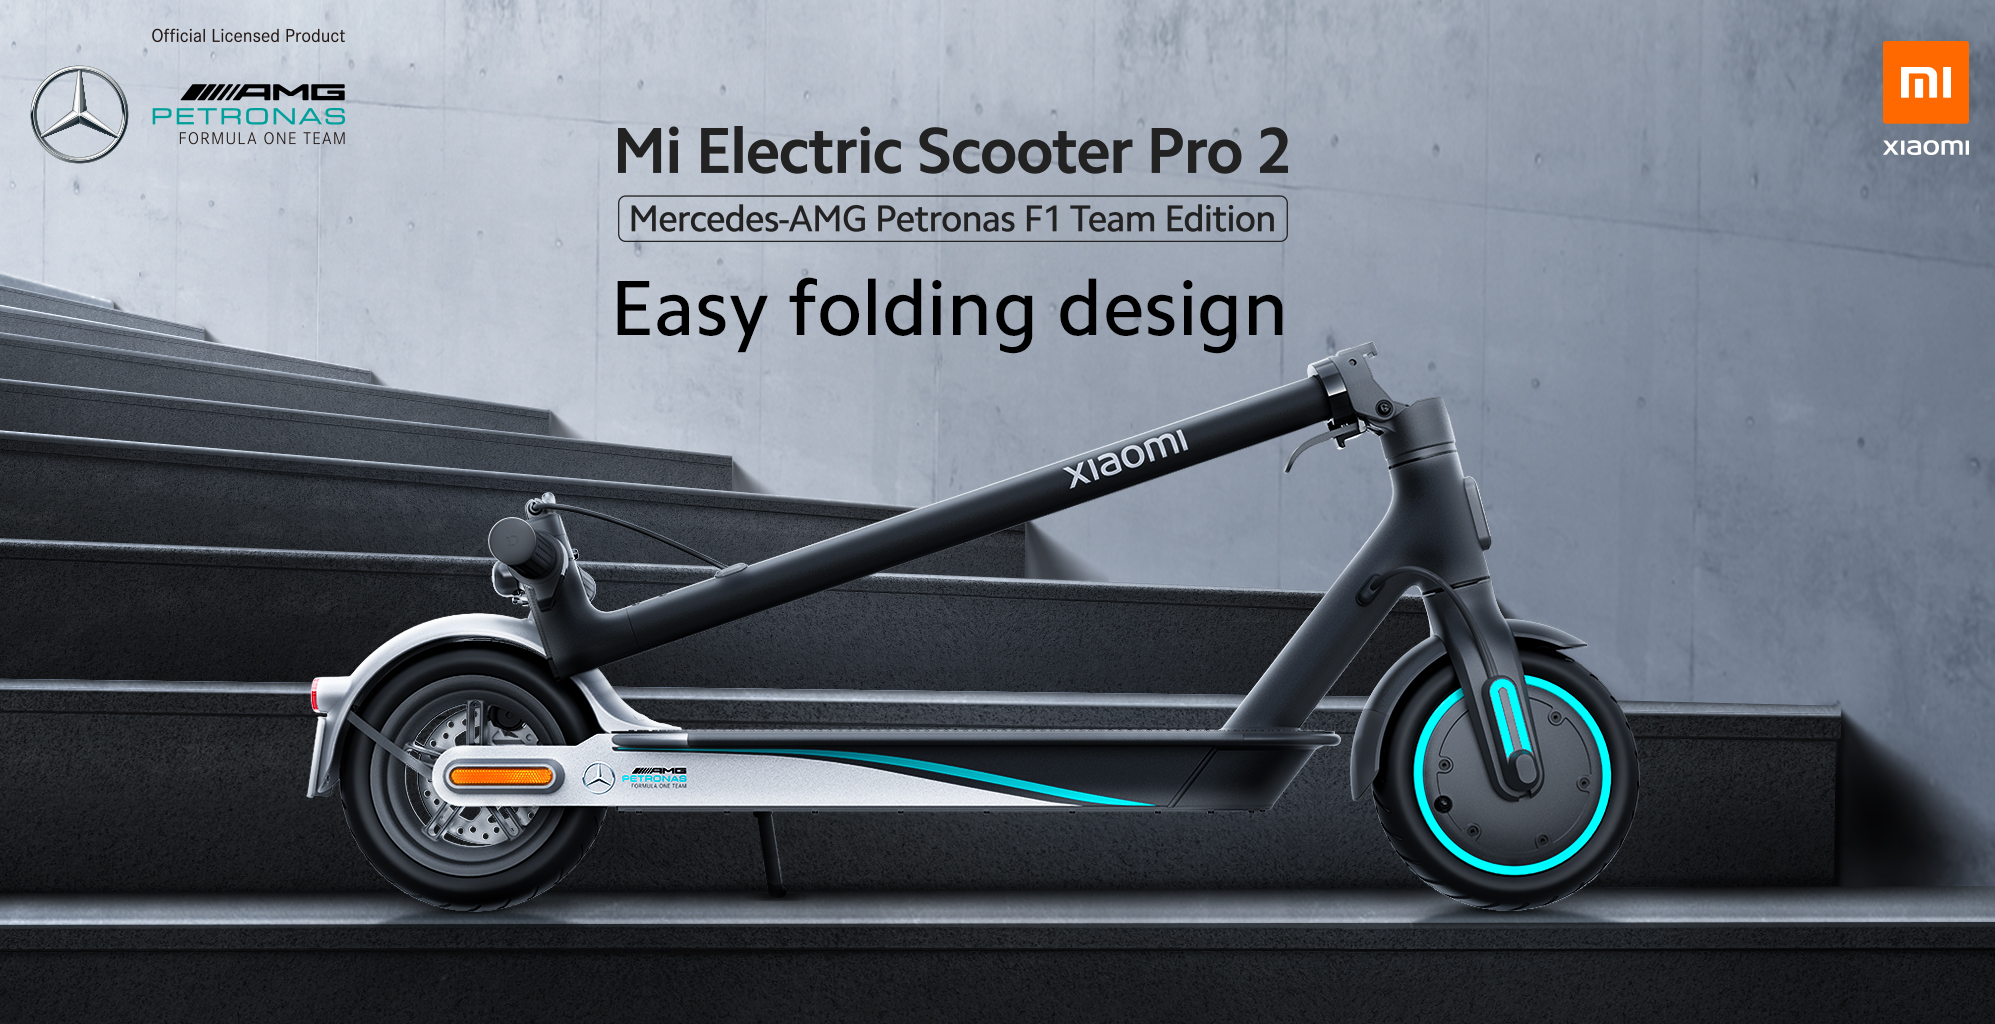 mi-electric-scooter-pro-2-mercedes-amg-petronas-f1-team-edition -  Specifications - Mi Global Home